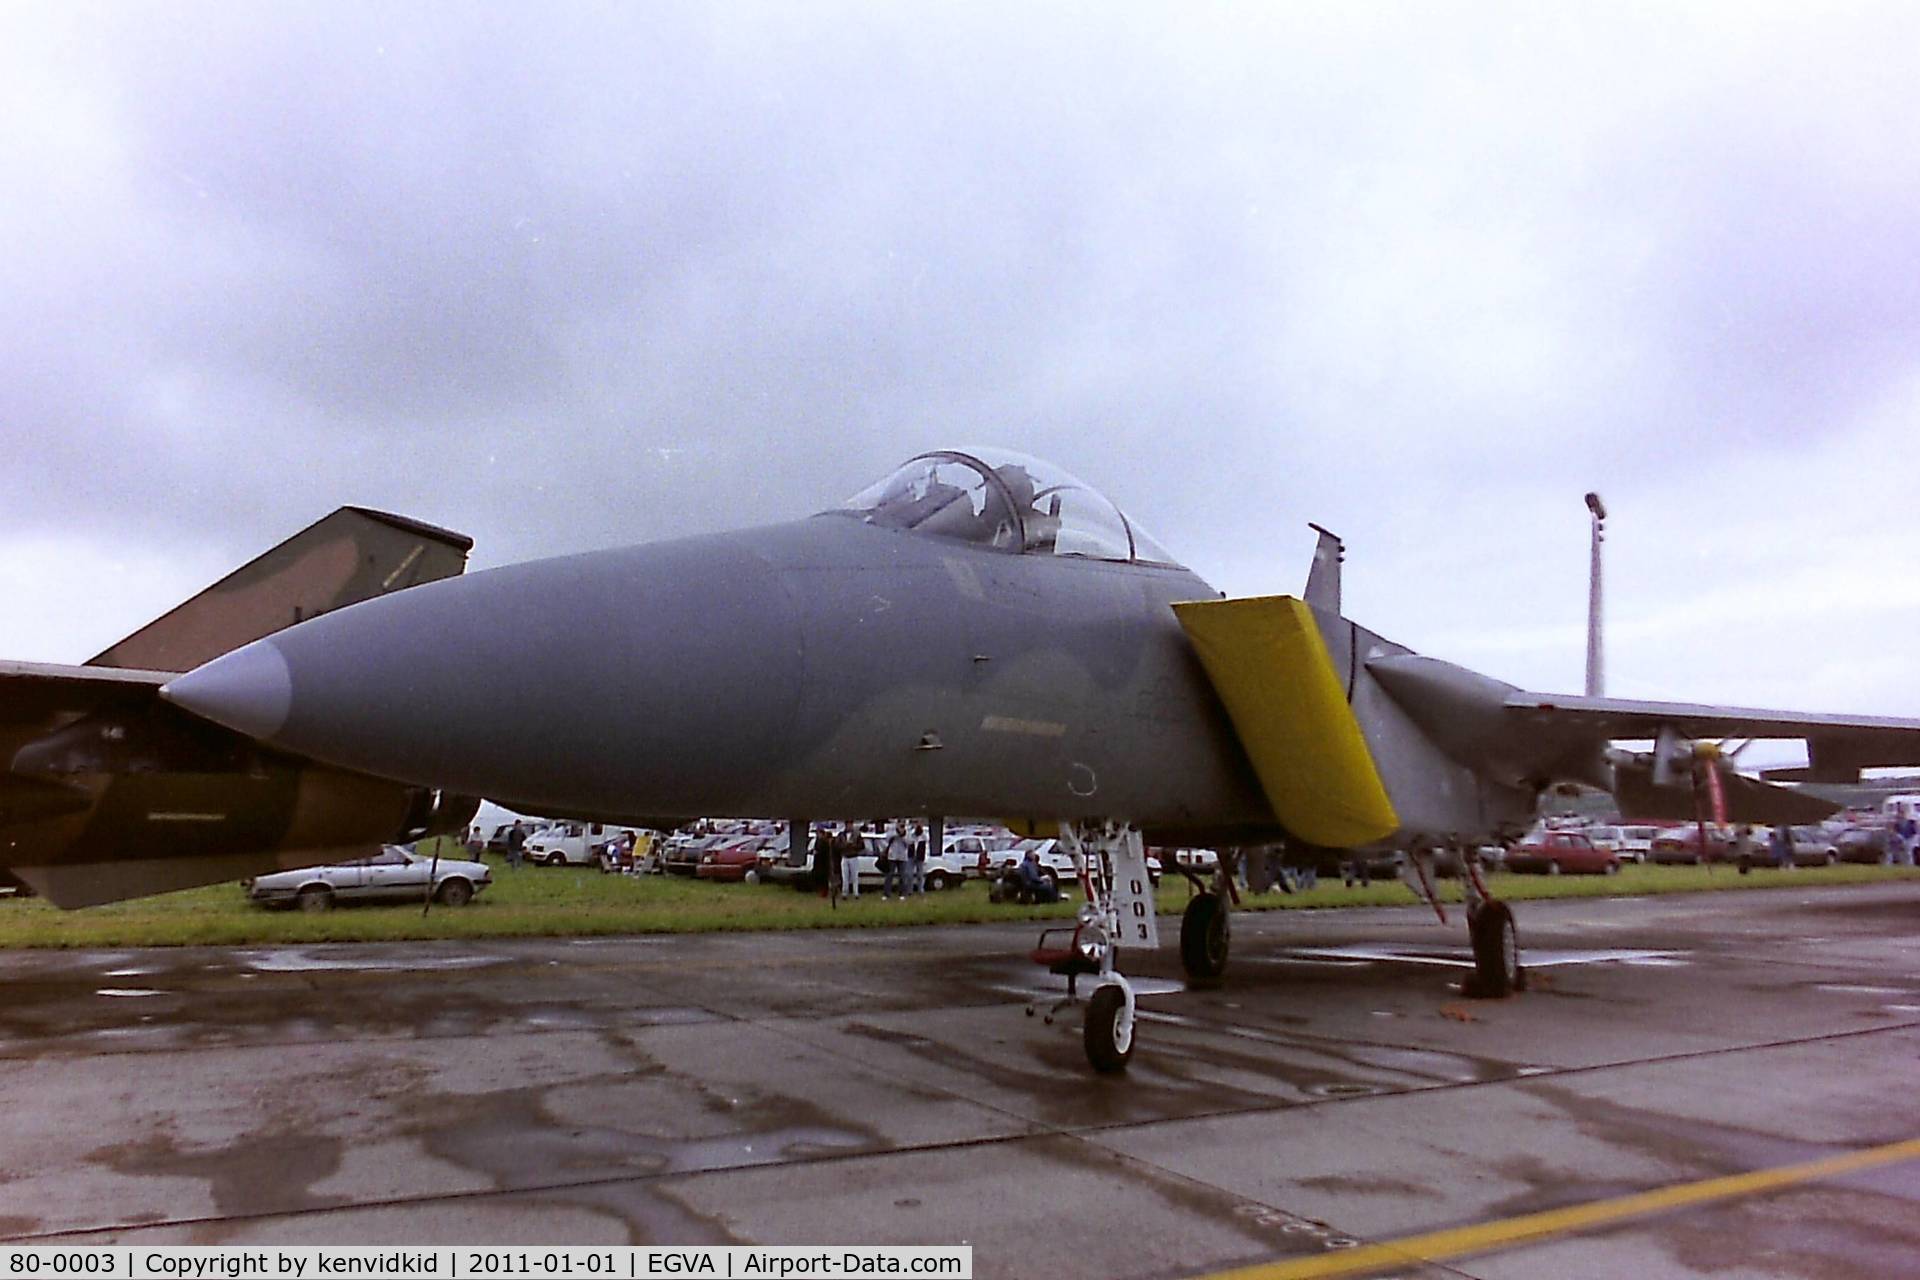 80-0003, 1980 McDonnell Douglas F-15C Eagle C/N 0636/C152, At RIAT 1993, scanned from negative.